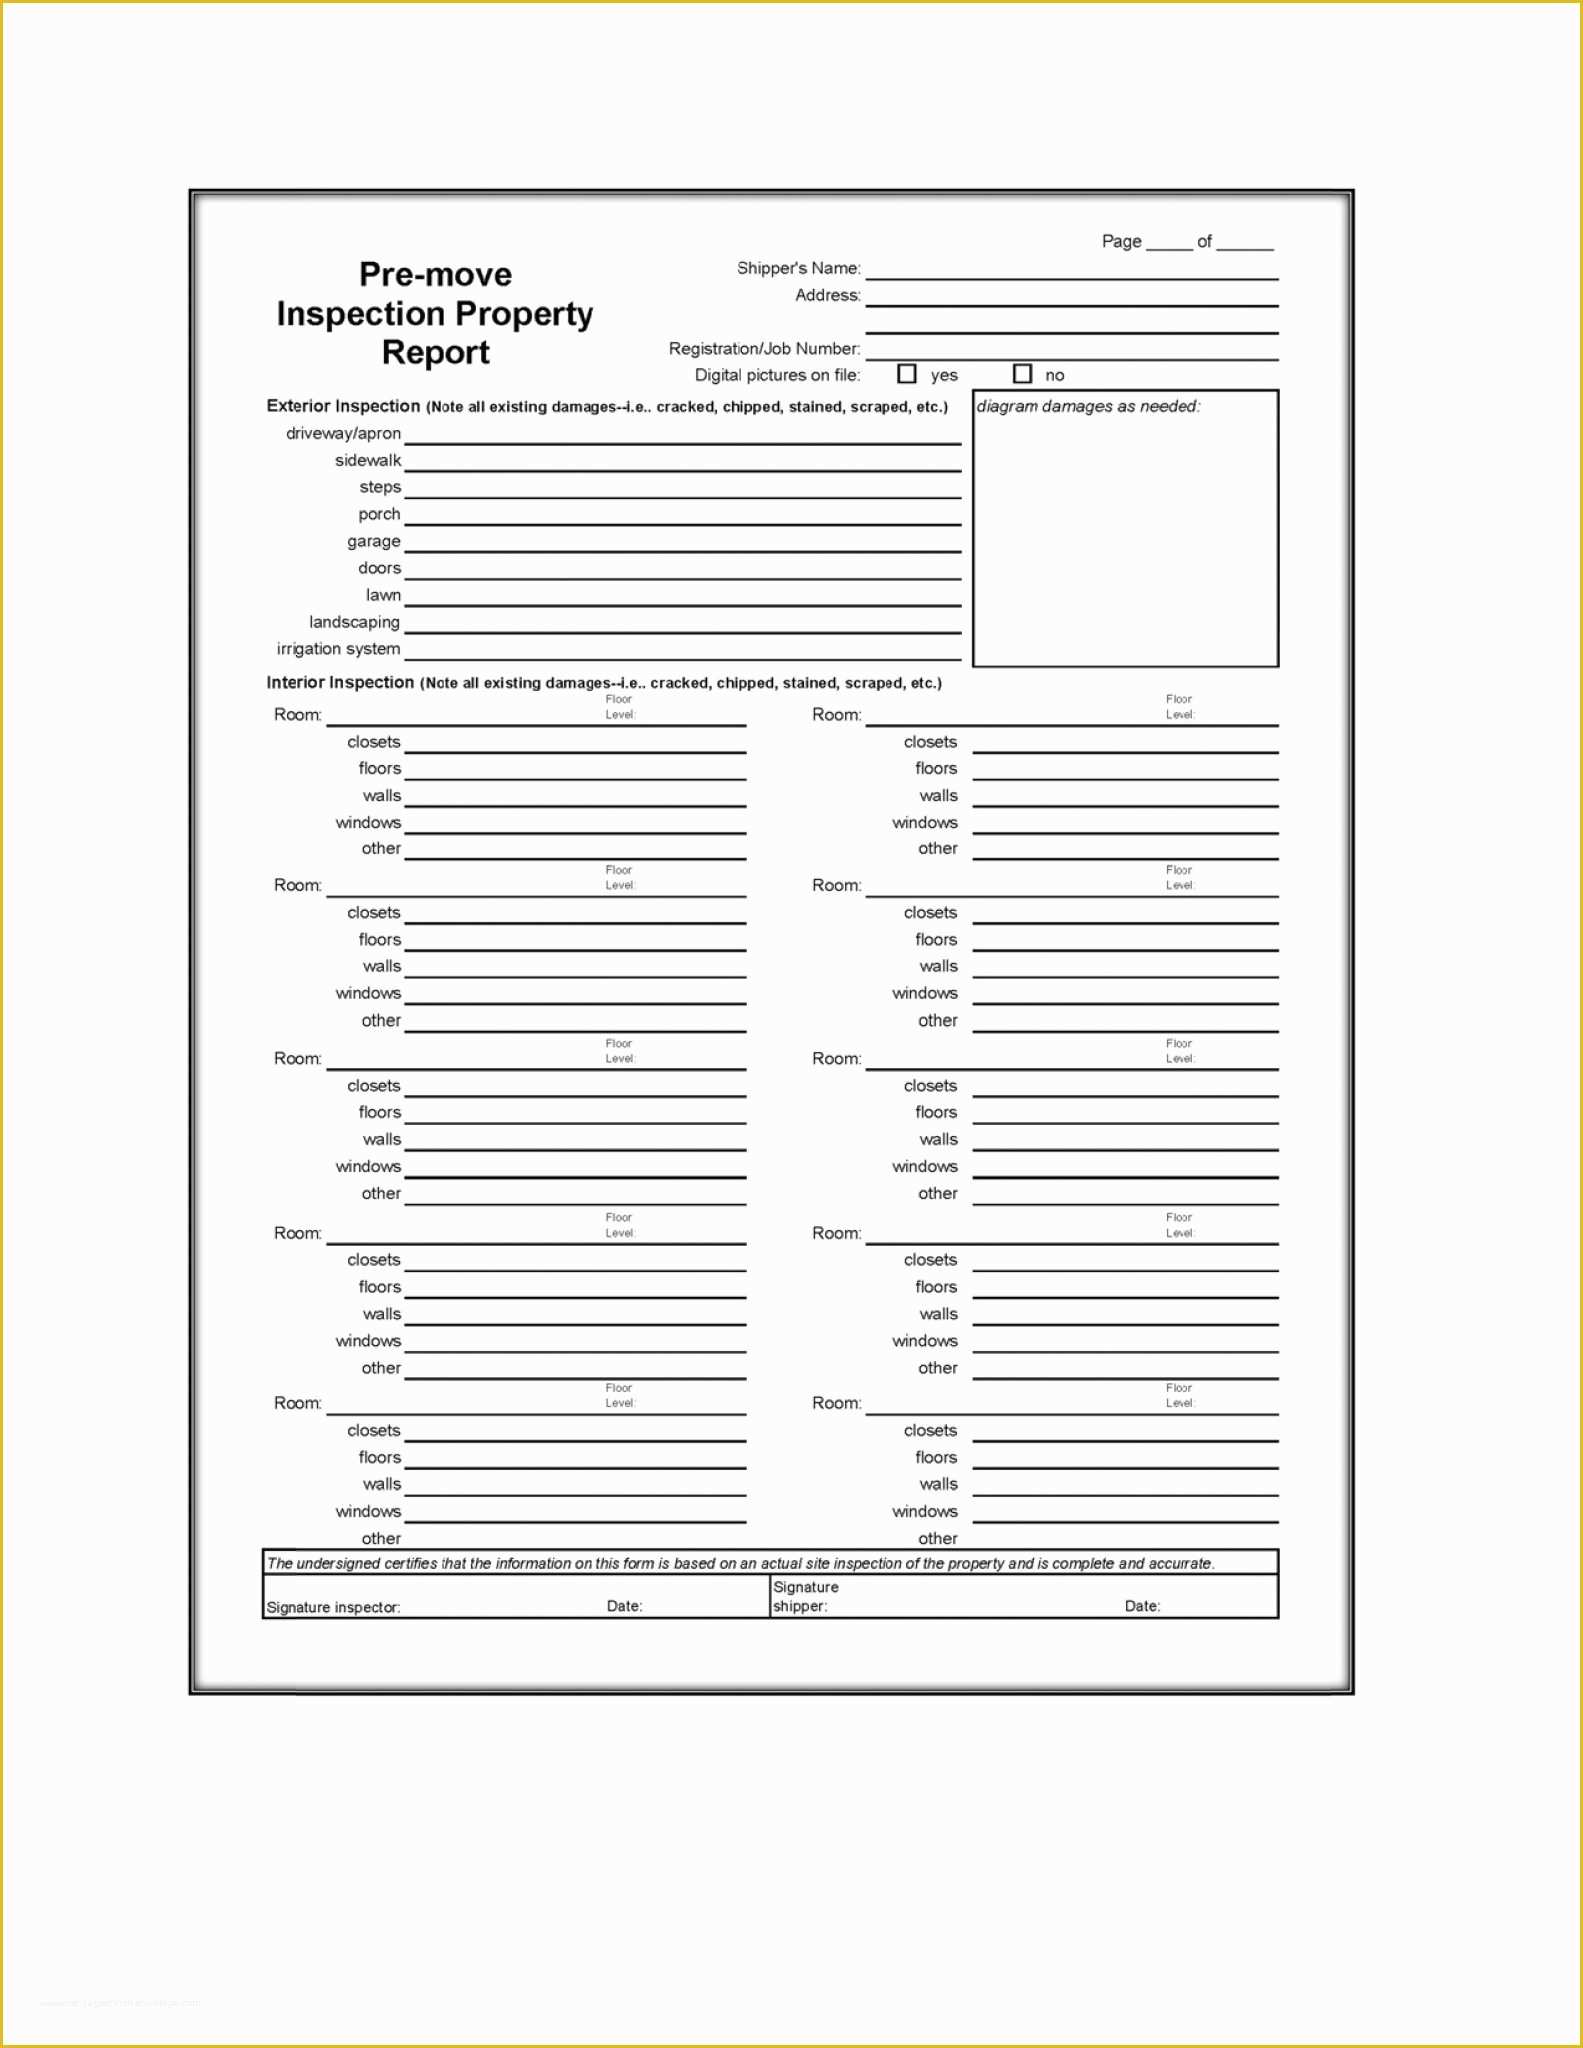 Home Inspection form Template Free Of Home Inspection Report Template Pdf Pulpedagogen